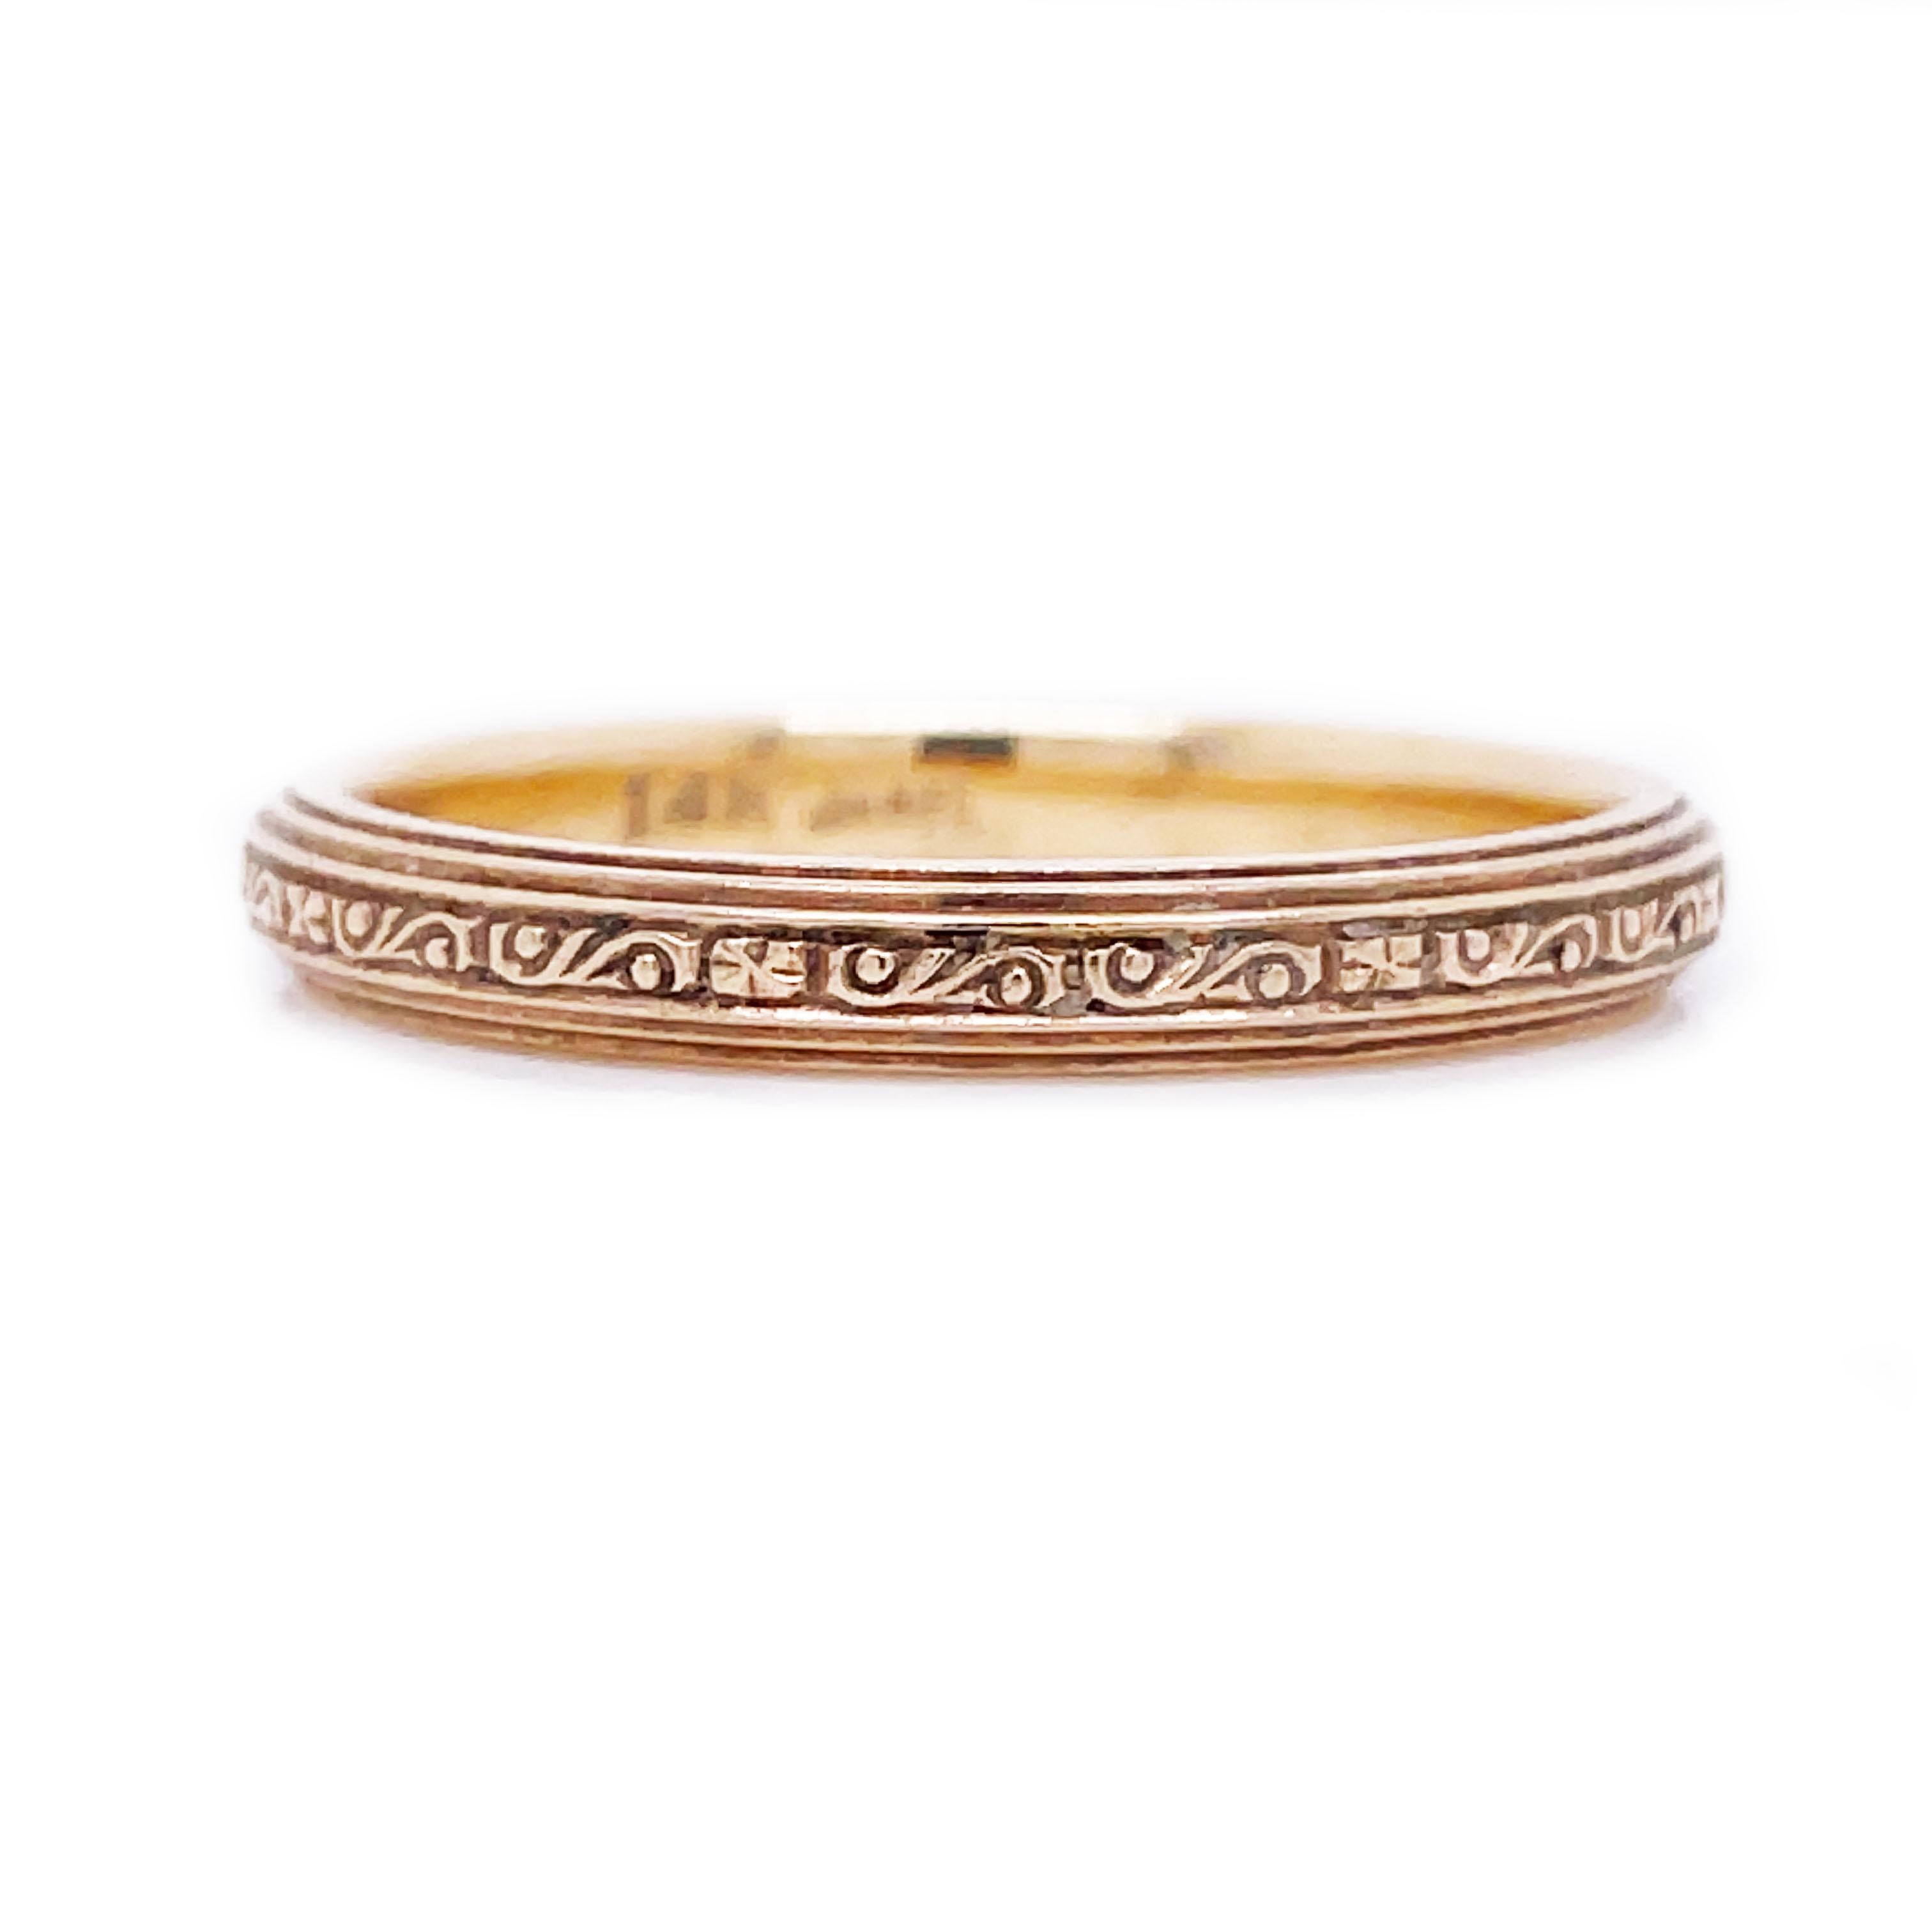 This is a lovely 14K yellow gold band from the 1940s that showcases gorgeous engraving along the entirety of the band! Bordered on each edge with gleaming yellow gold bands, the center is encircled by a graceful engraving of small gold flowers and